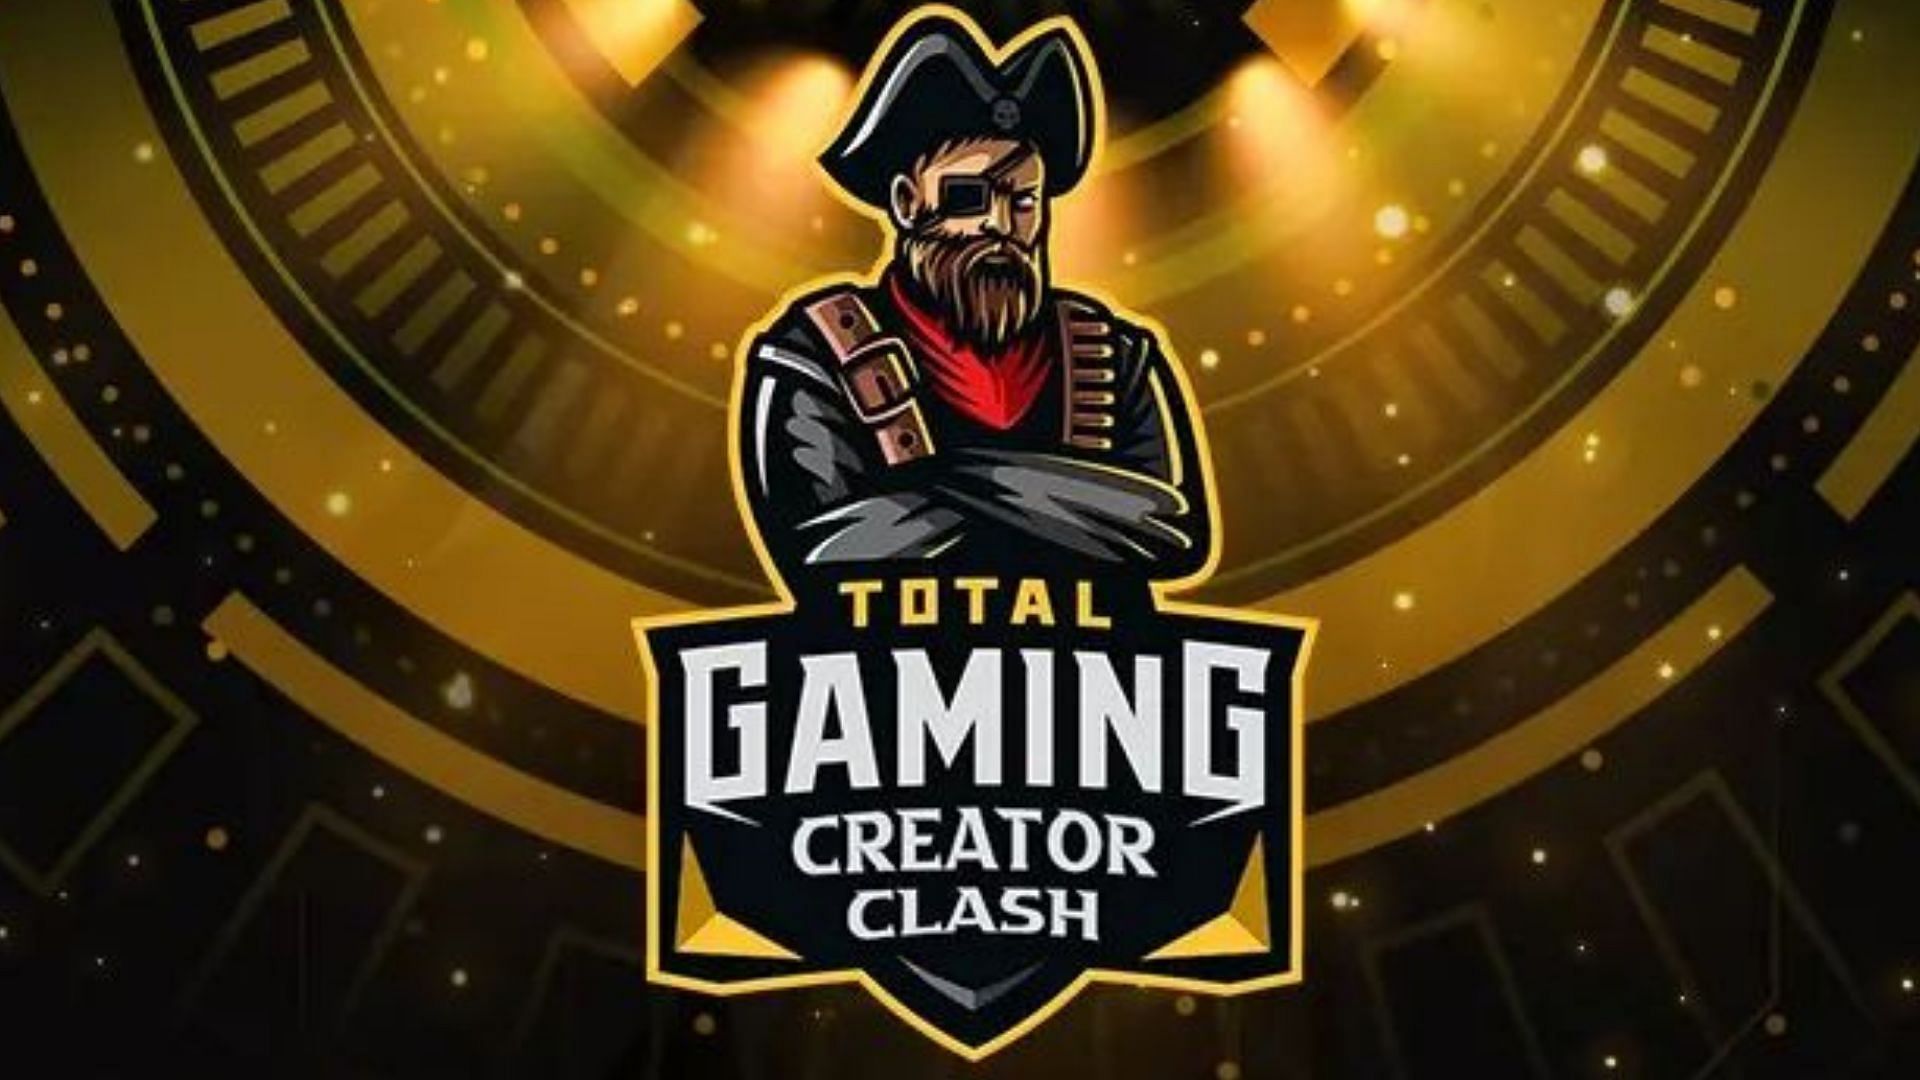 Total Gaming Free Fire Creator Clash begins today (Image via Villager Esports)